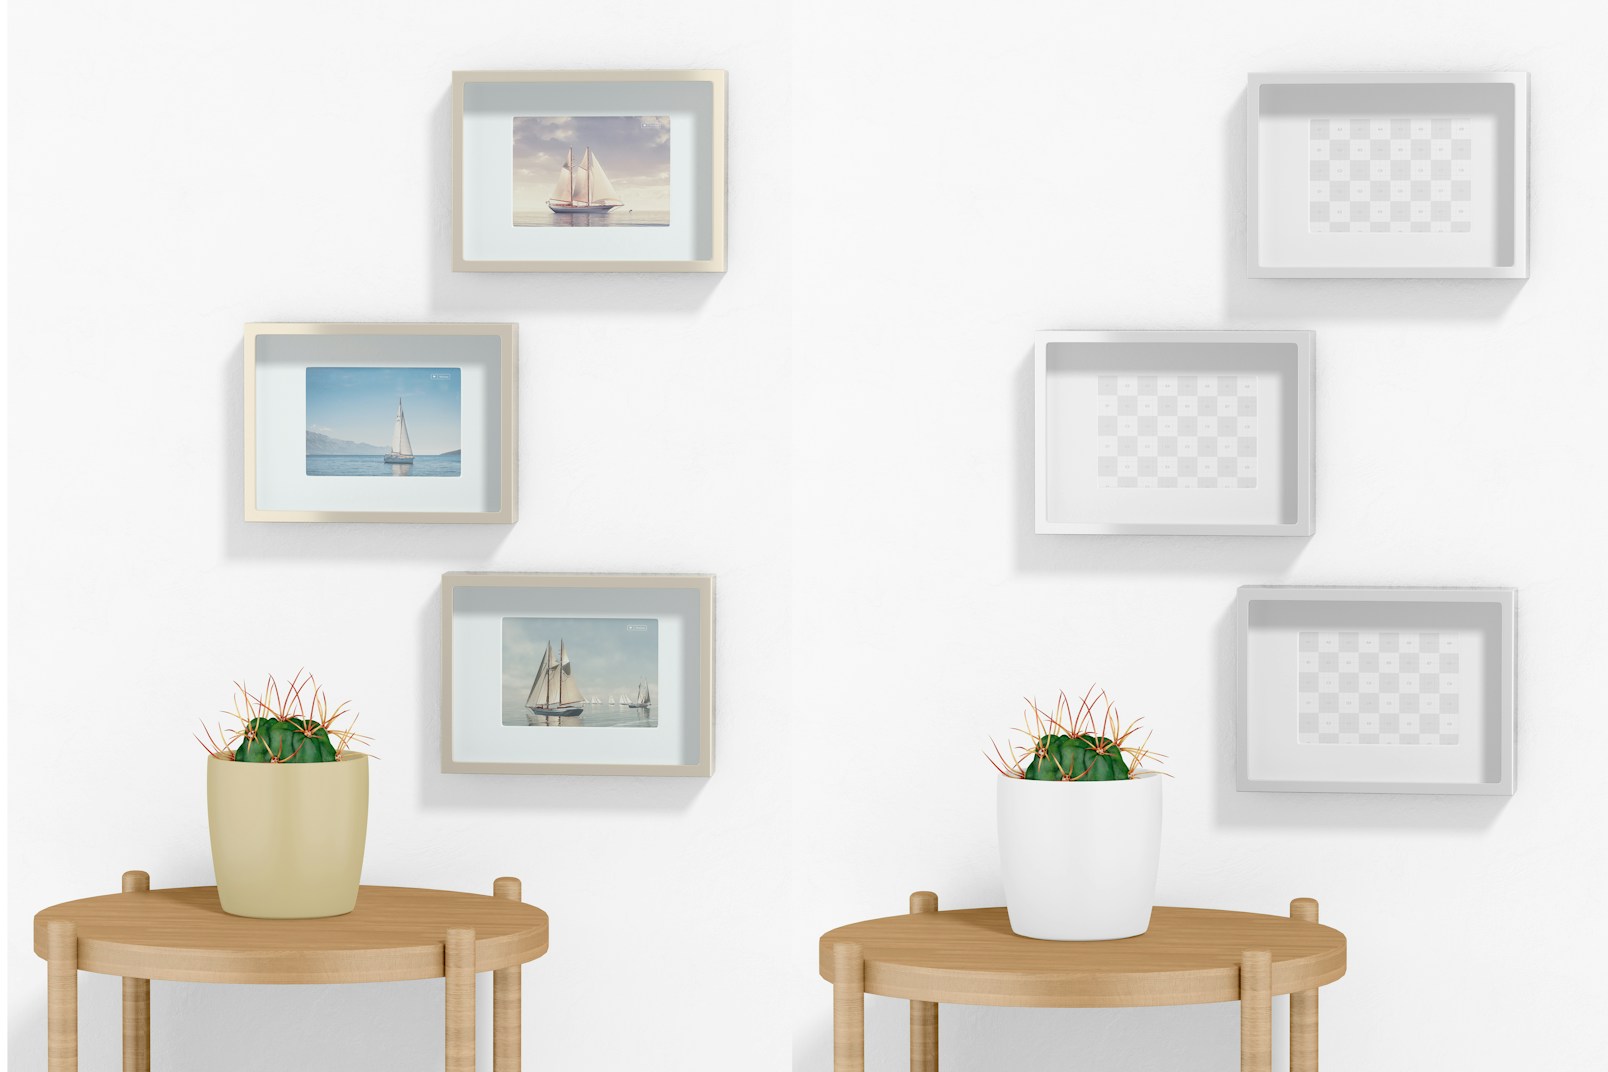 Metallic Small Shadow Gallery Frame Mockup, Front View